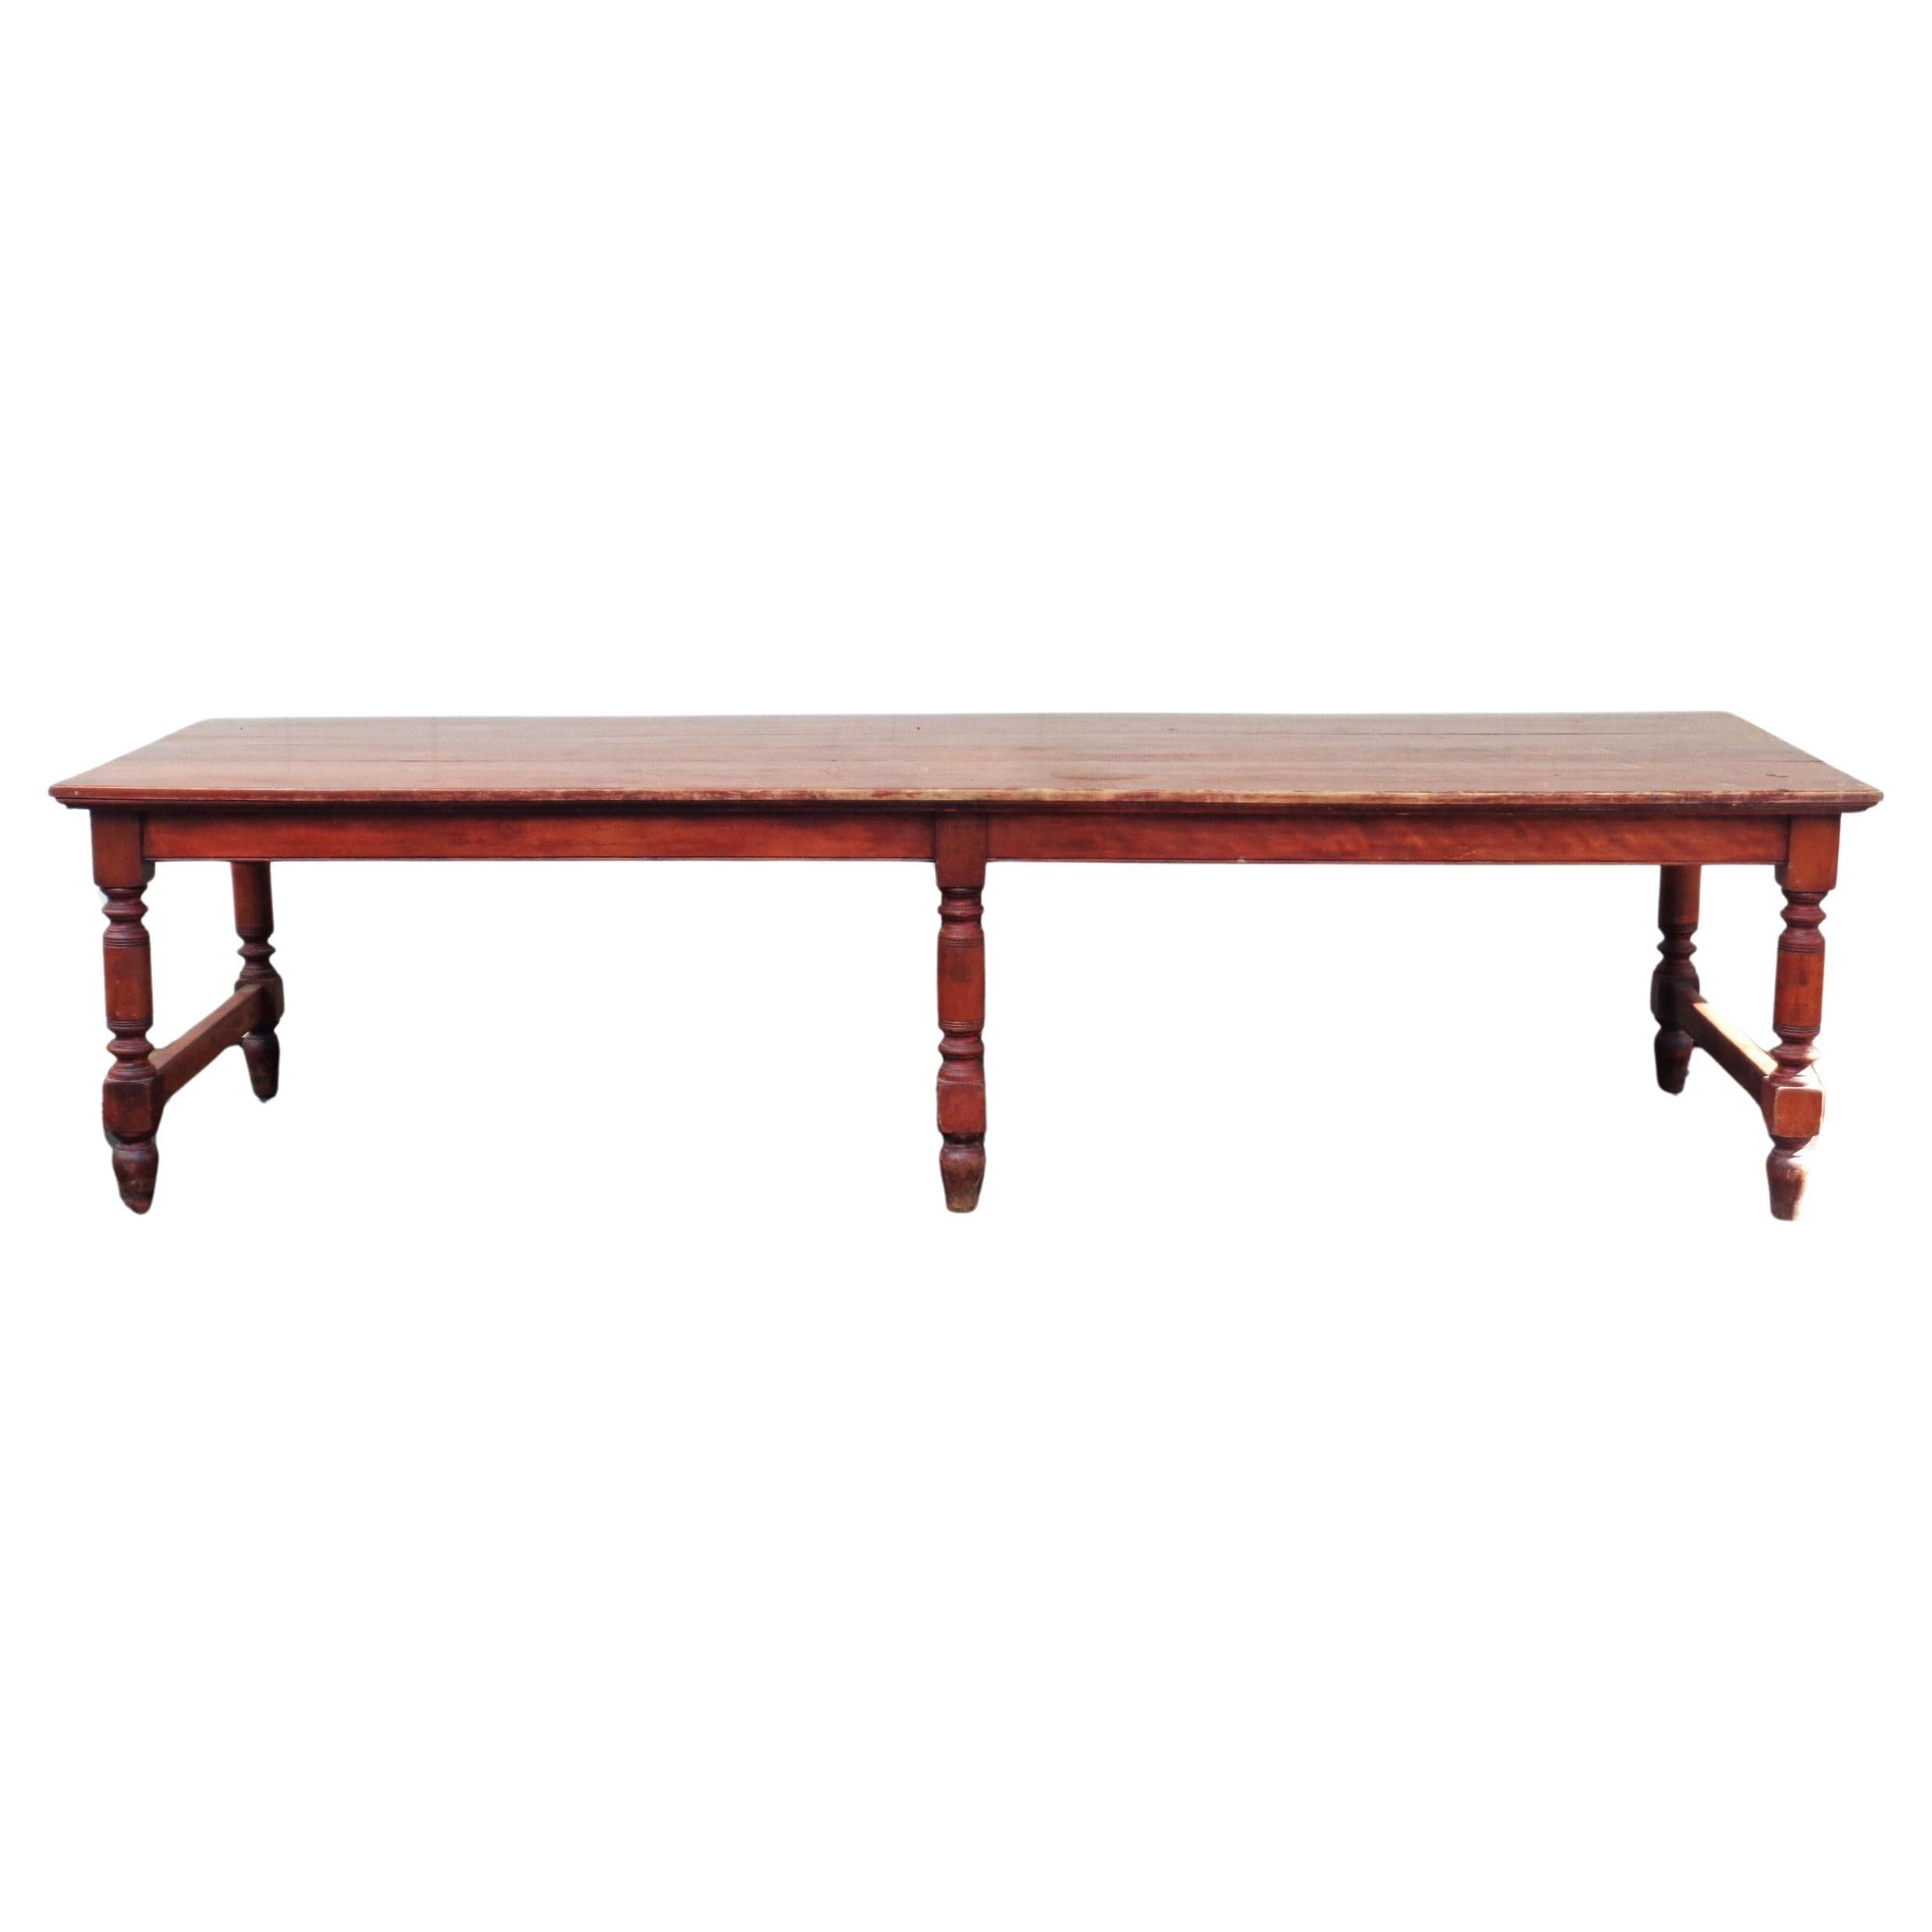  Antique American banquet dining table. Constructed of hardwood maple in the original stained finish with six well defined turned legs joined by bottom stretchers at each side and at center. Circa 1870-1880. Measures 120 inches wide x 41 inches deep